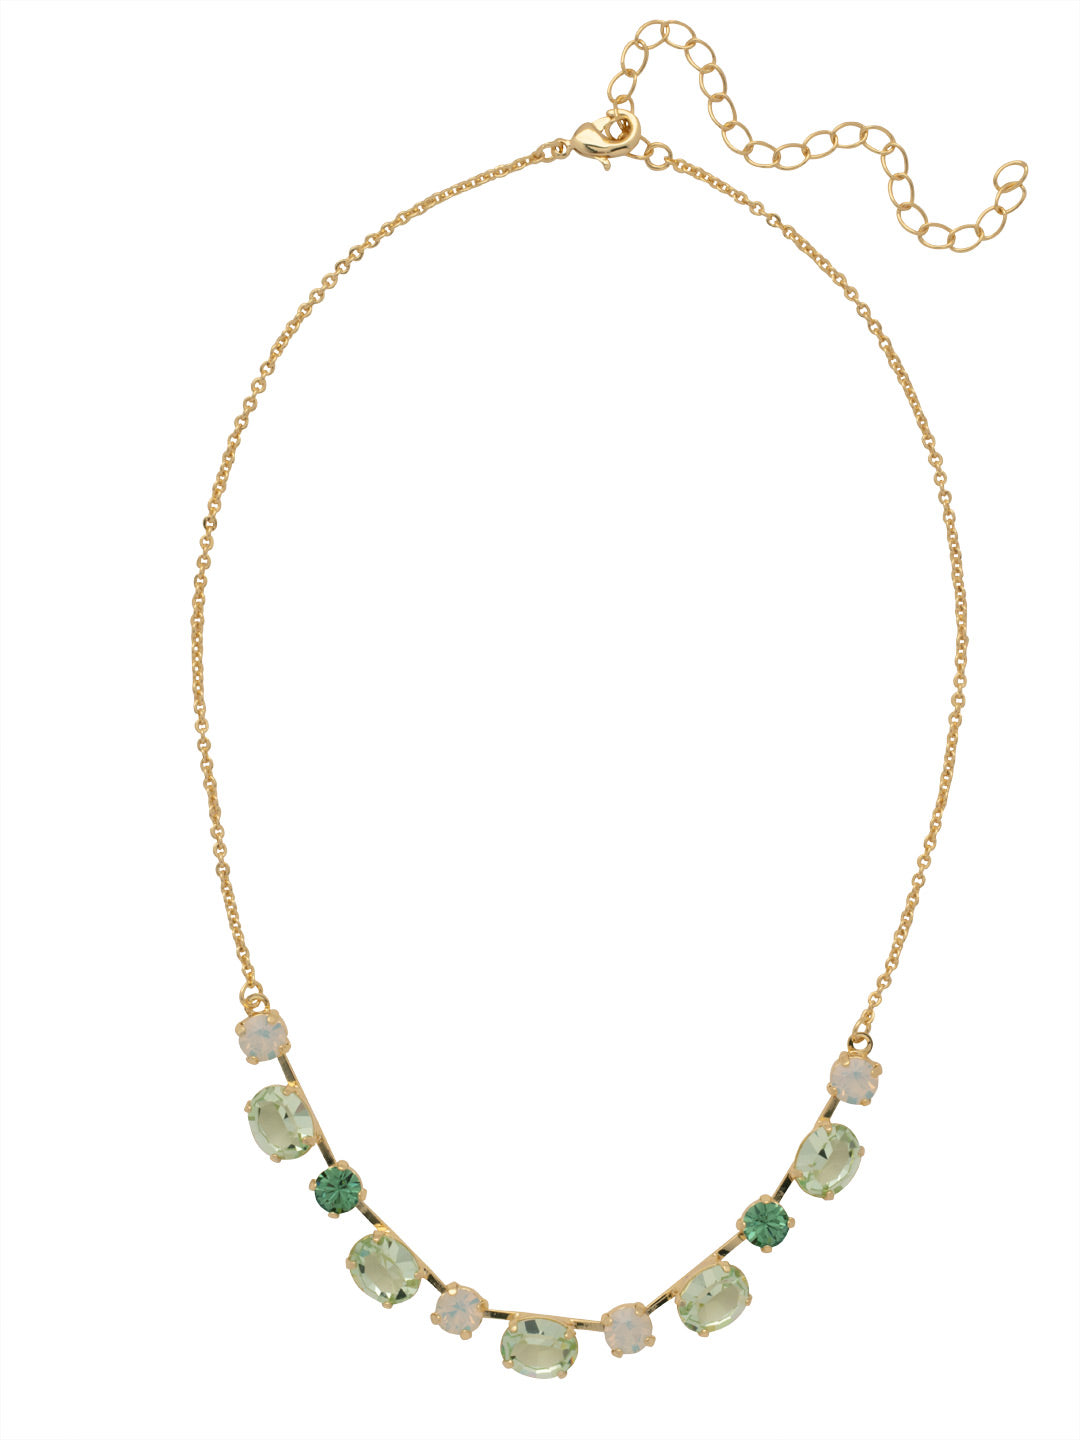 Connie Tennis Necklace - NFF33BGSGR - <p>The Connie Tennis Necklace features an assortment of cut crystals on a delicate adjustable chain, secured by a lobster claw clasp. From Sorrelli's Sage Green collection in our Bright Gold-tone finish.</p>